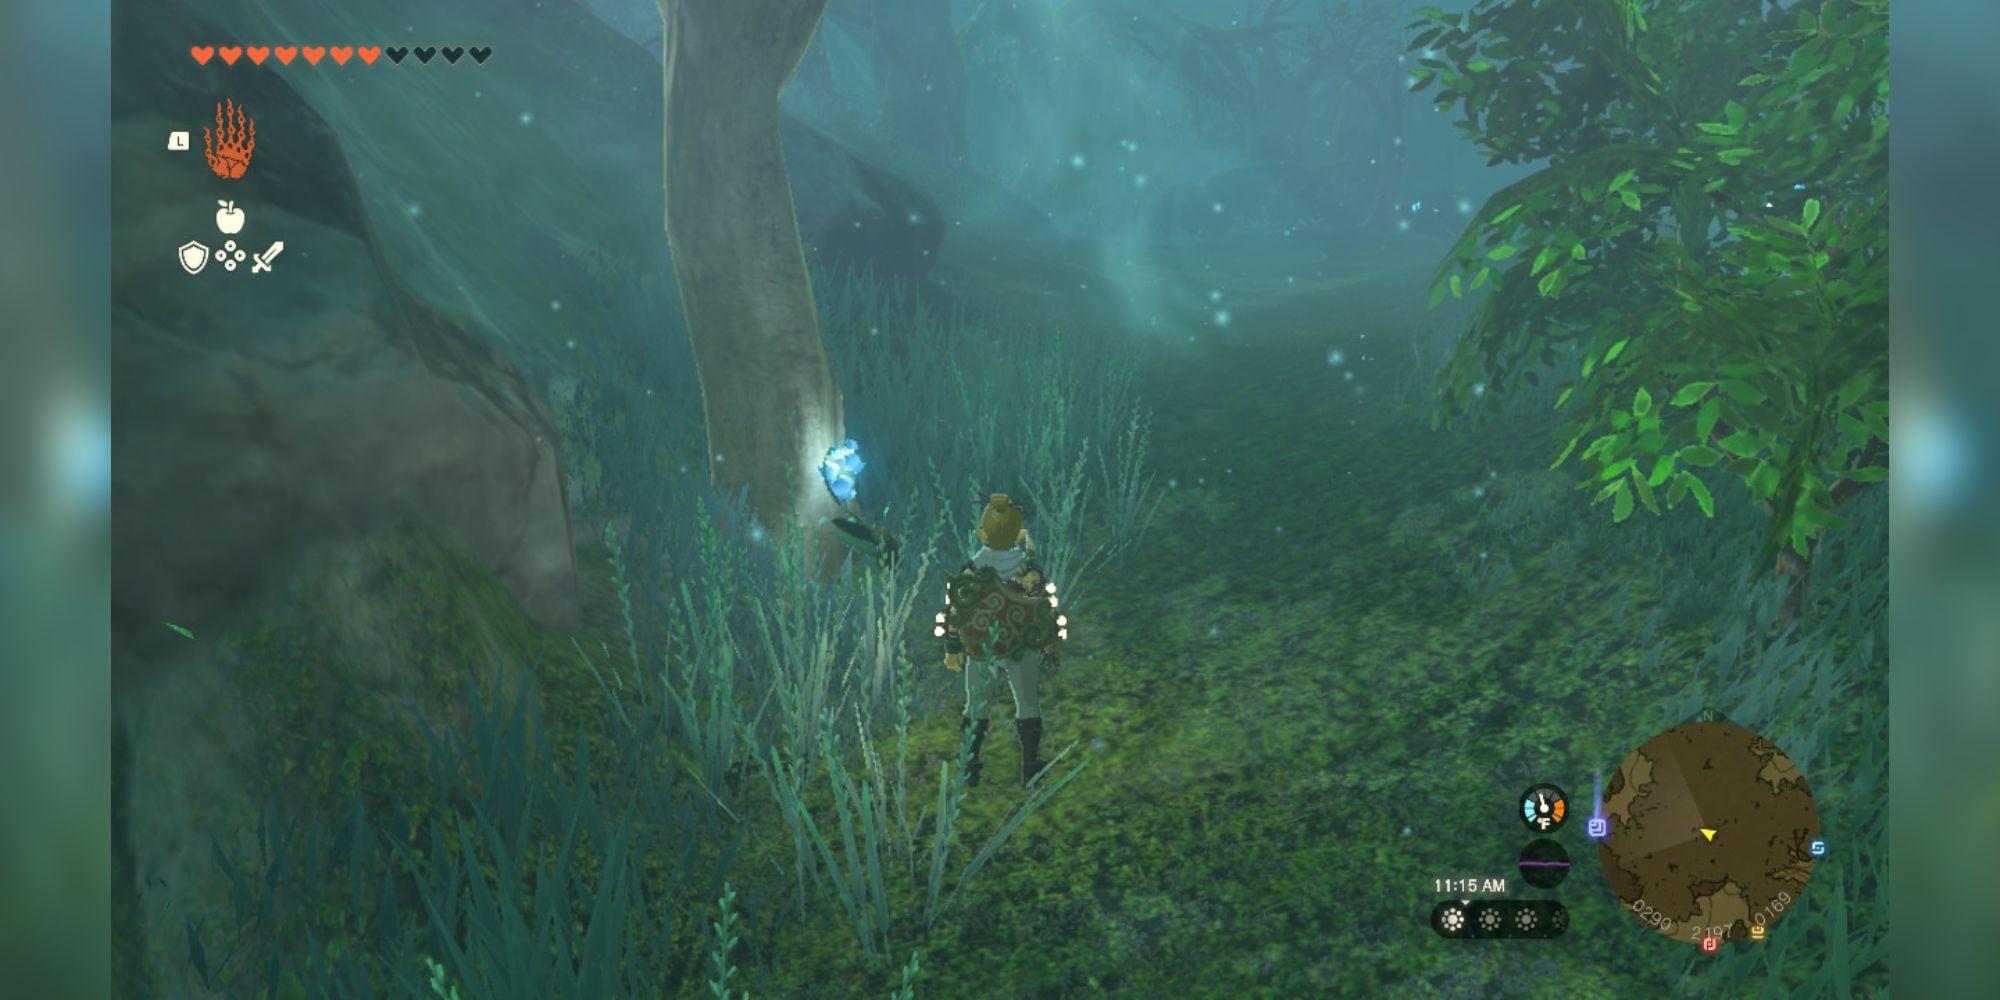 Link stands in a misty forest looking at a glowing blue flower.